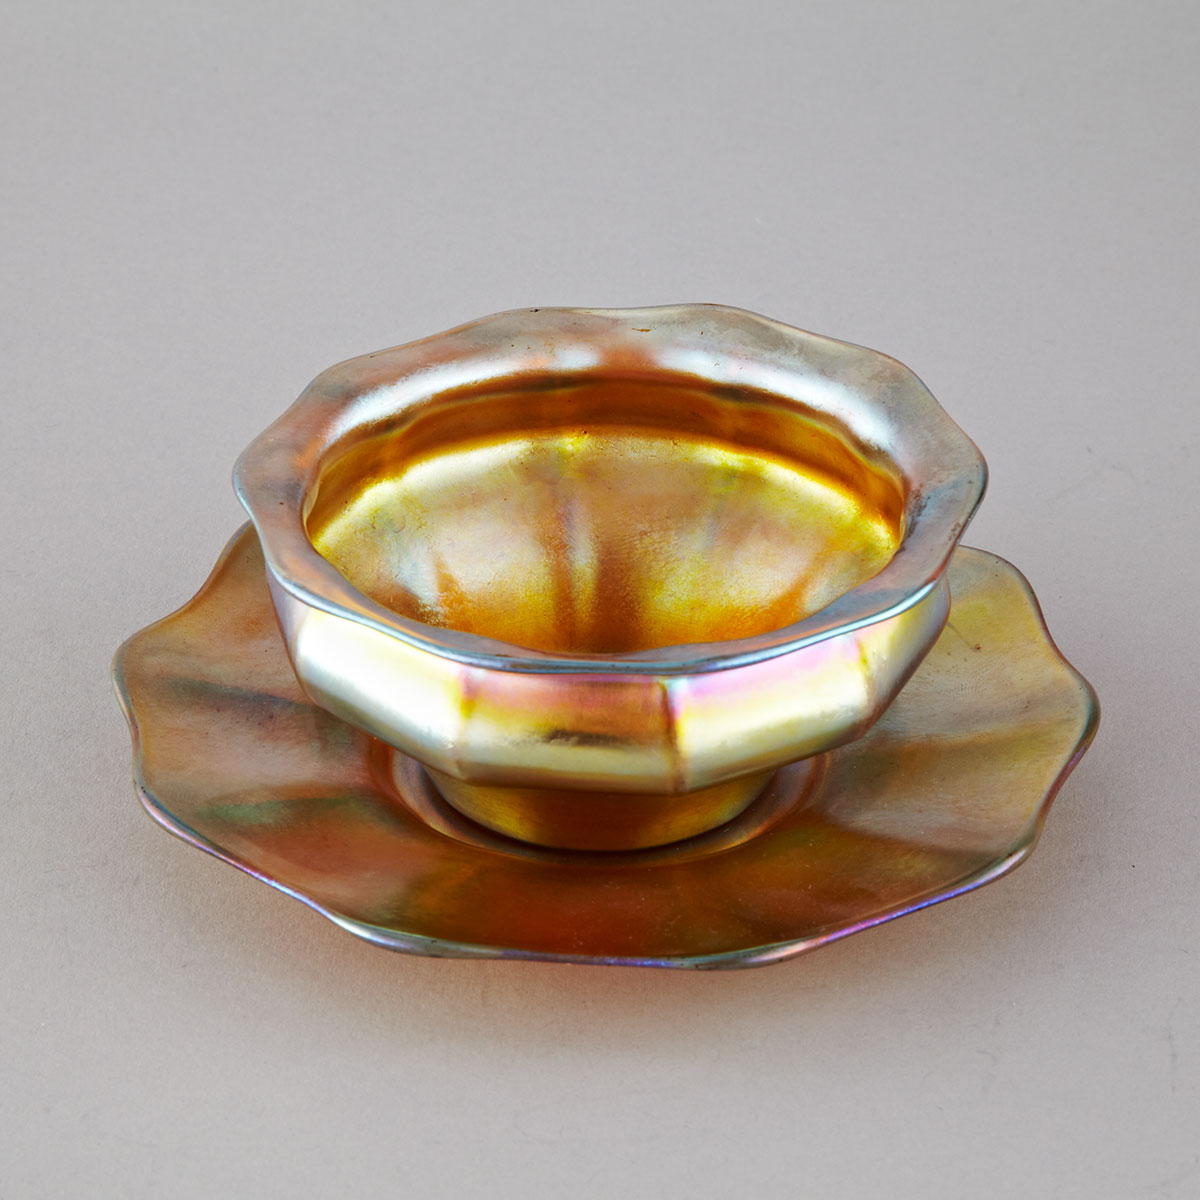 Tiffany ‘Favrile’ Iridescent Glass Bowl and Stand, early 20th century